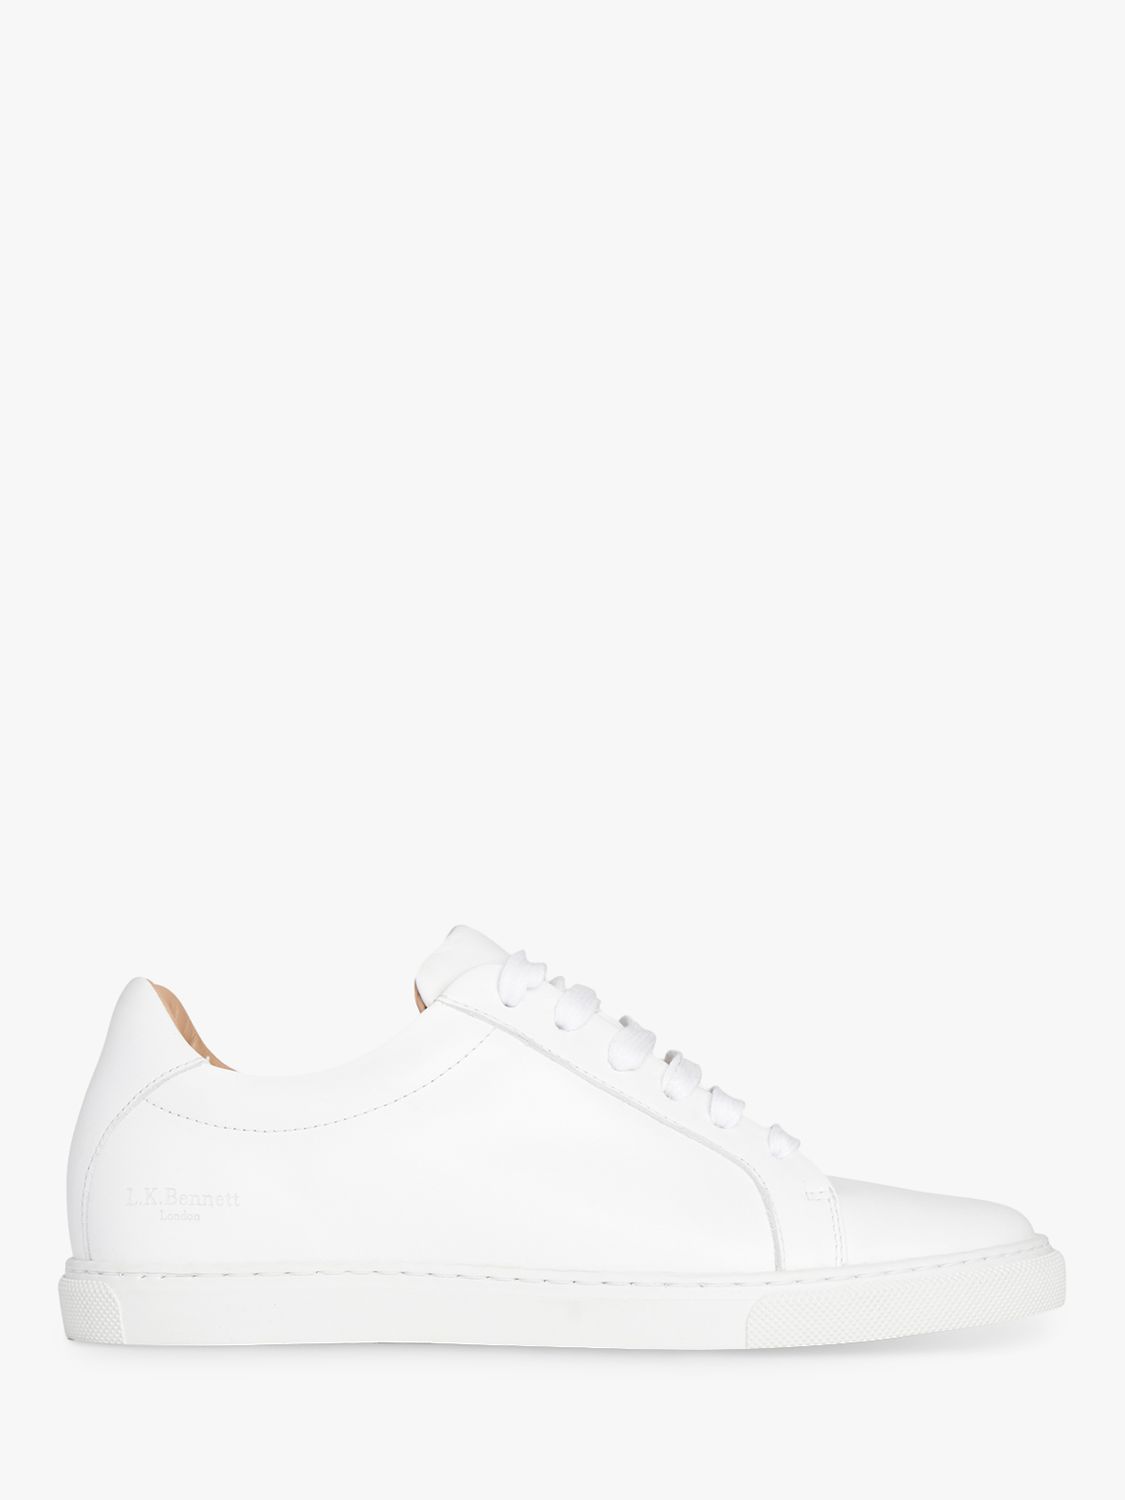 L.K.Bennett Jack Leather Lace Up Trainers, White at John Lewis & Partners